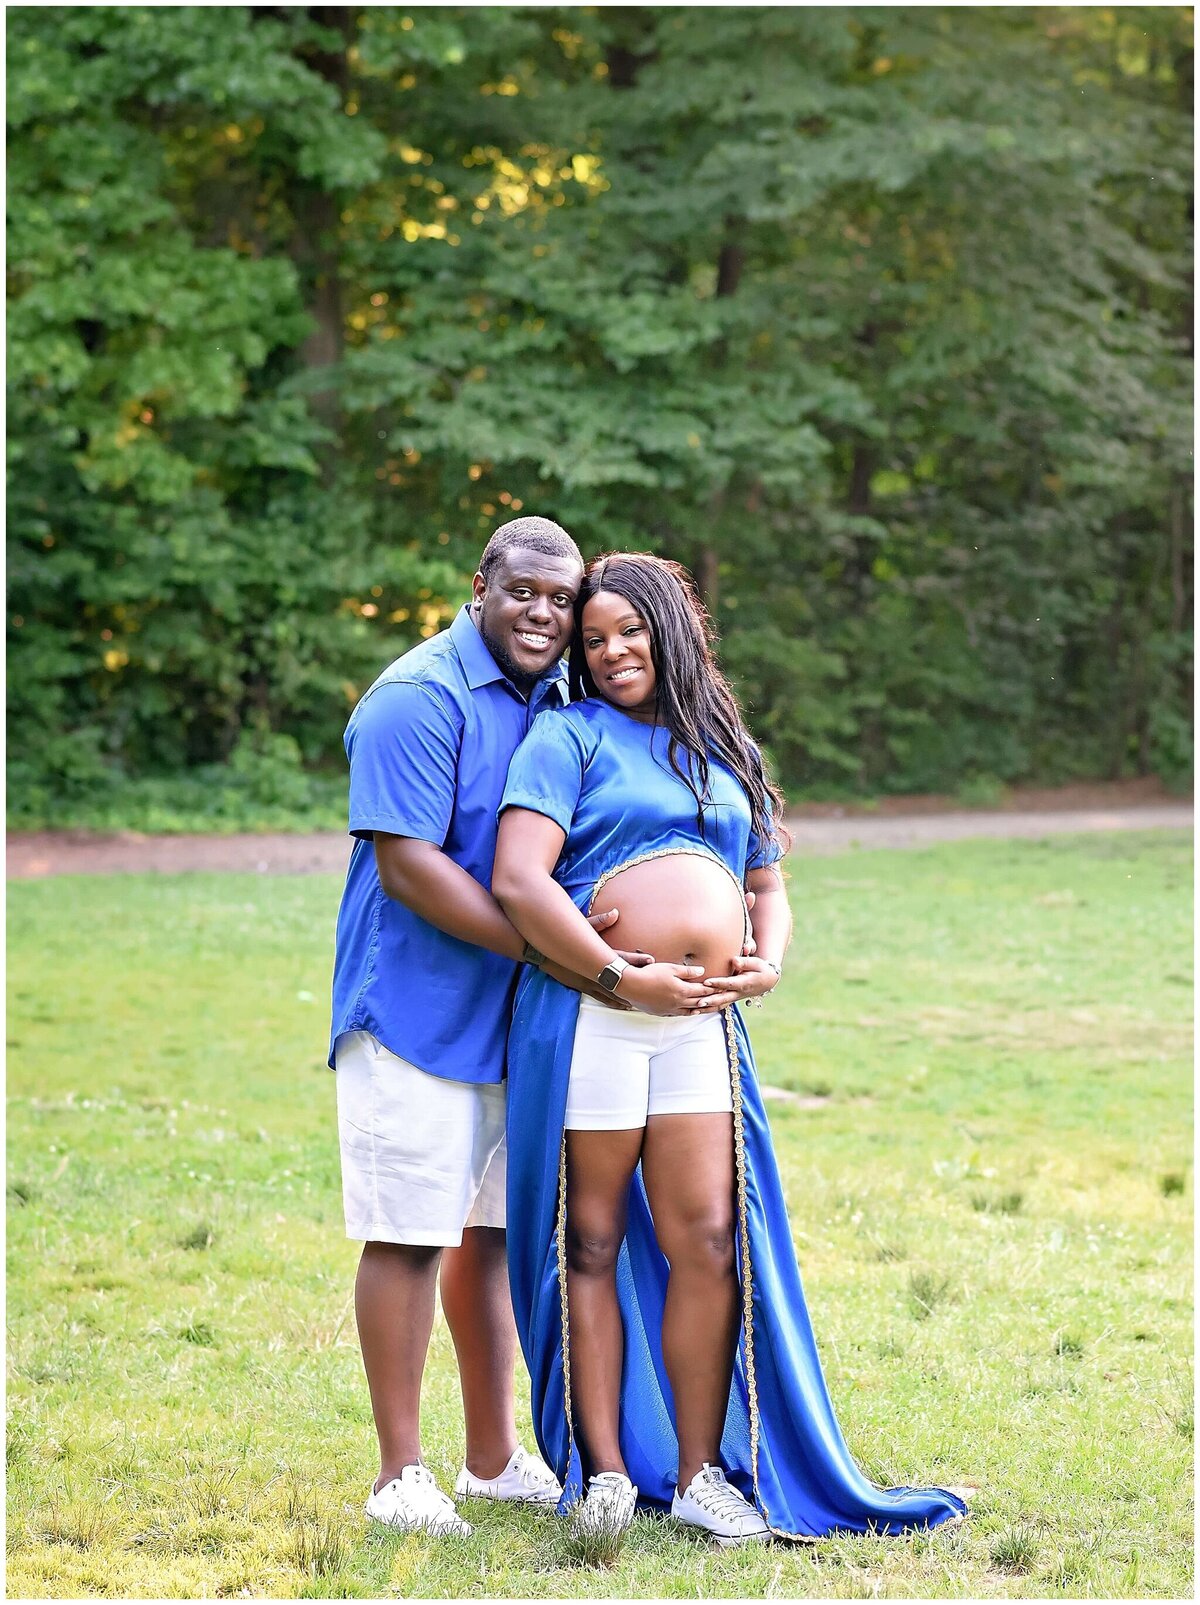 Serene outdoor setting with mother standing and father holding her belly from the back to showcase their love for their baby to be.